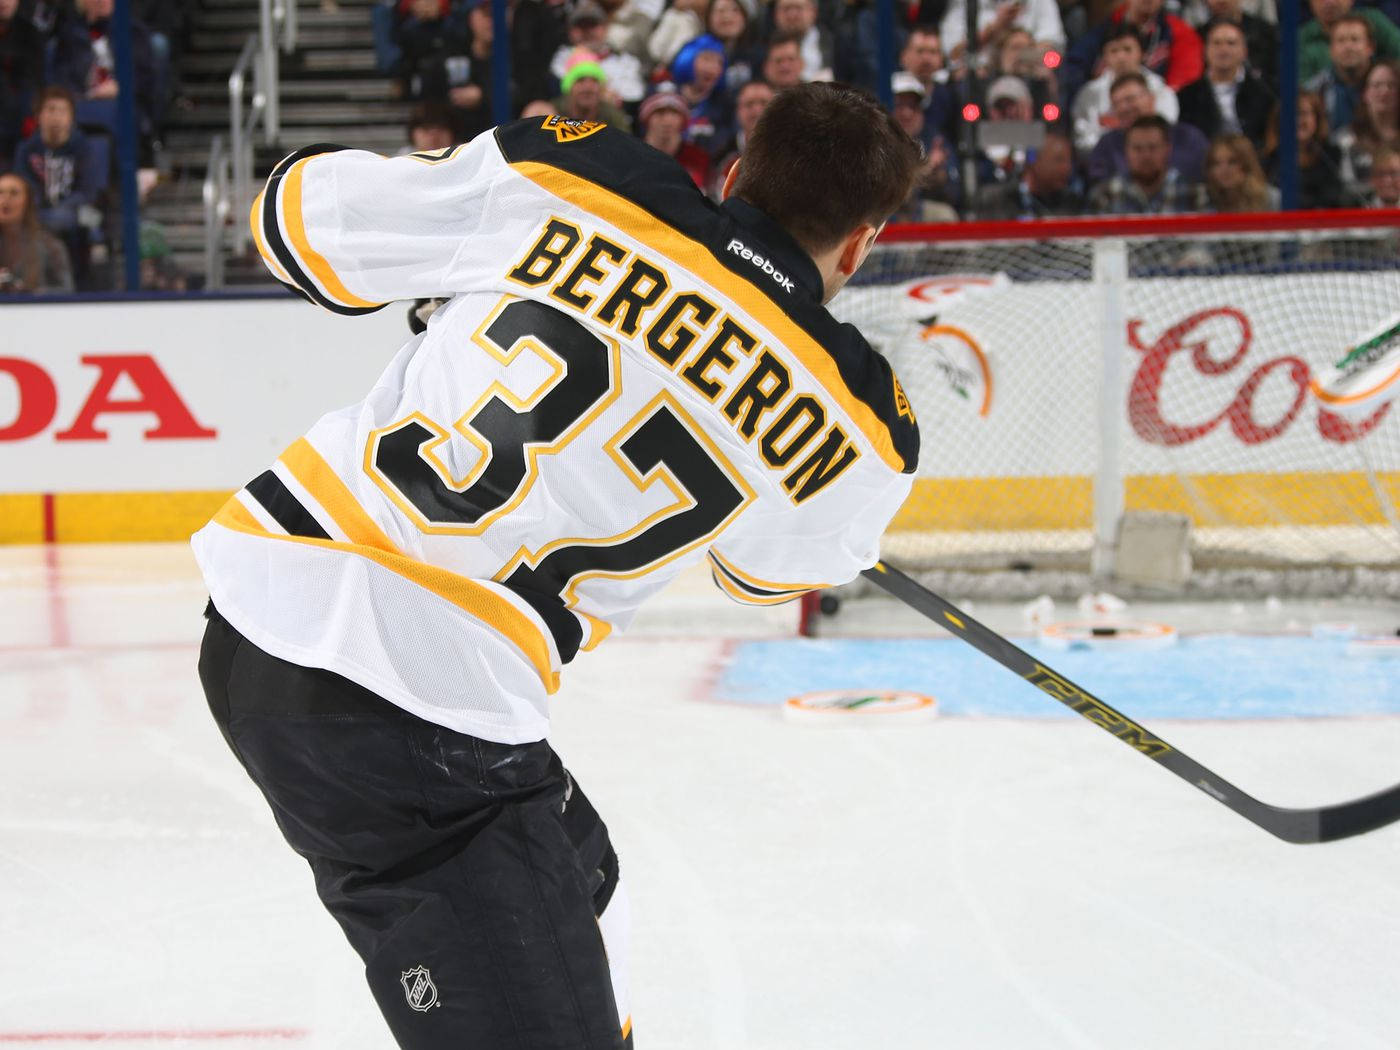 Patrice Bergeron in Action during a hockey game Wallpaper